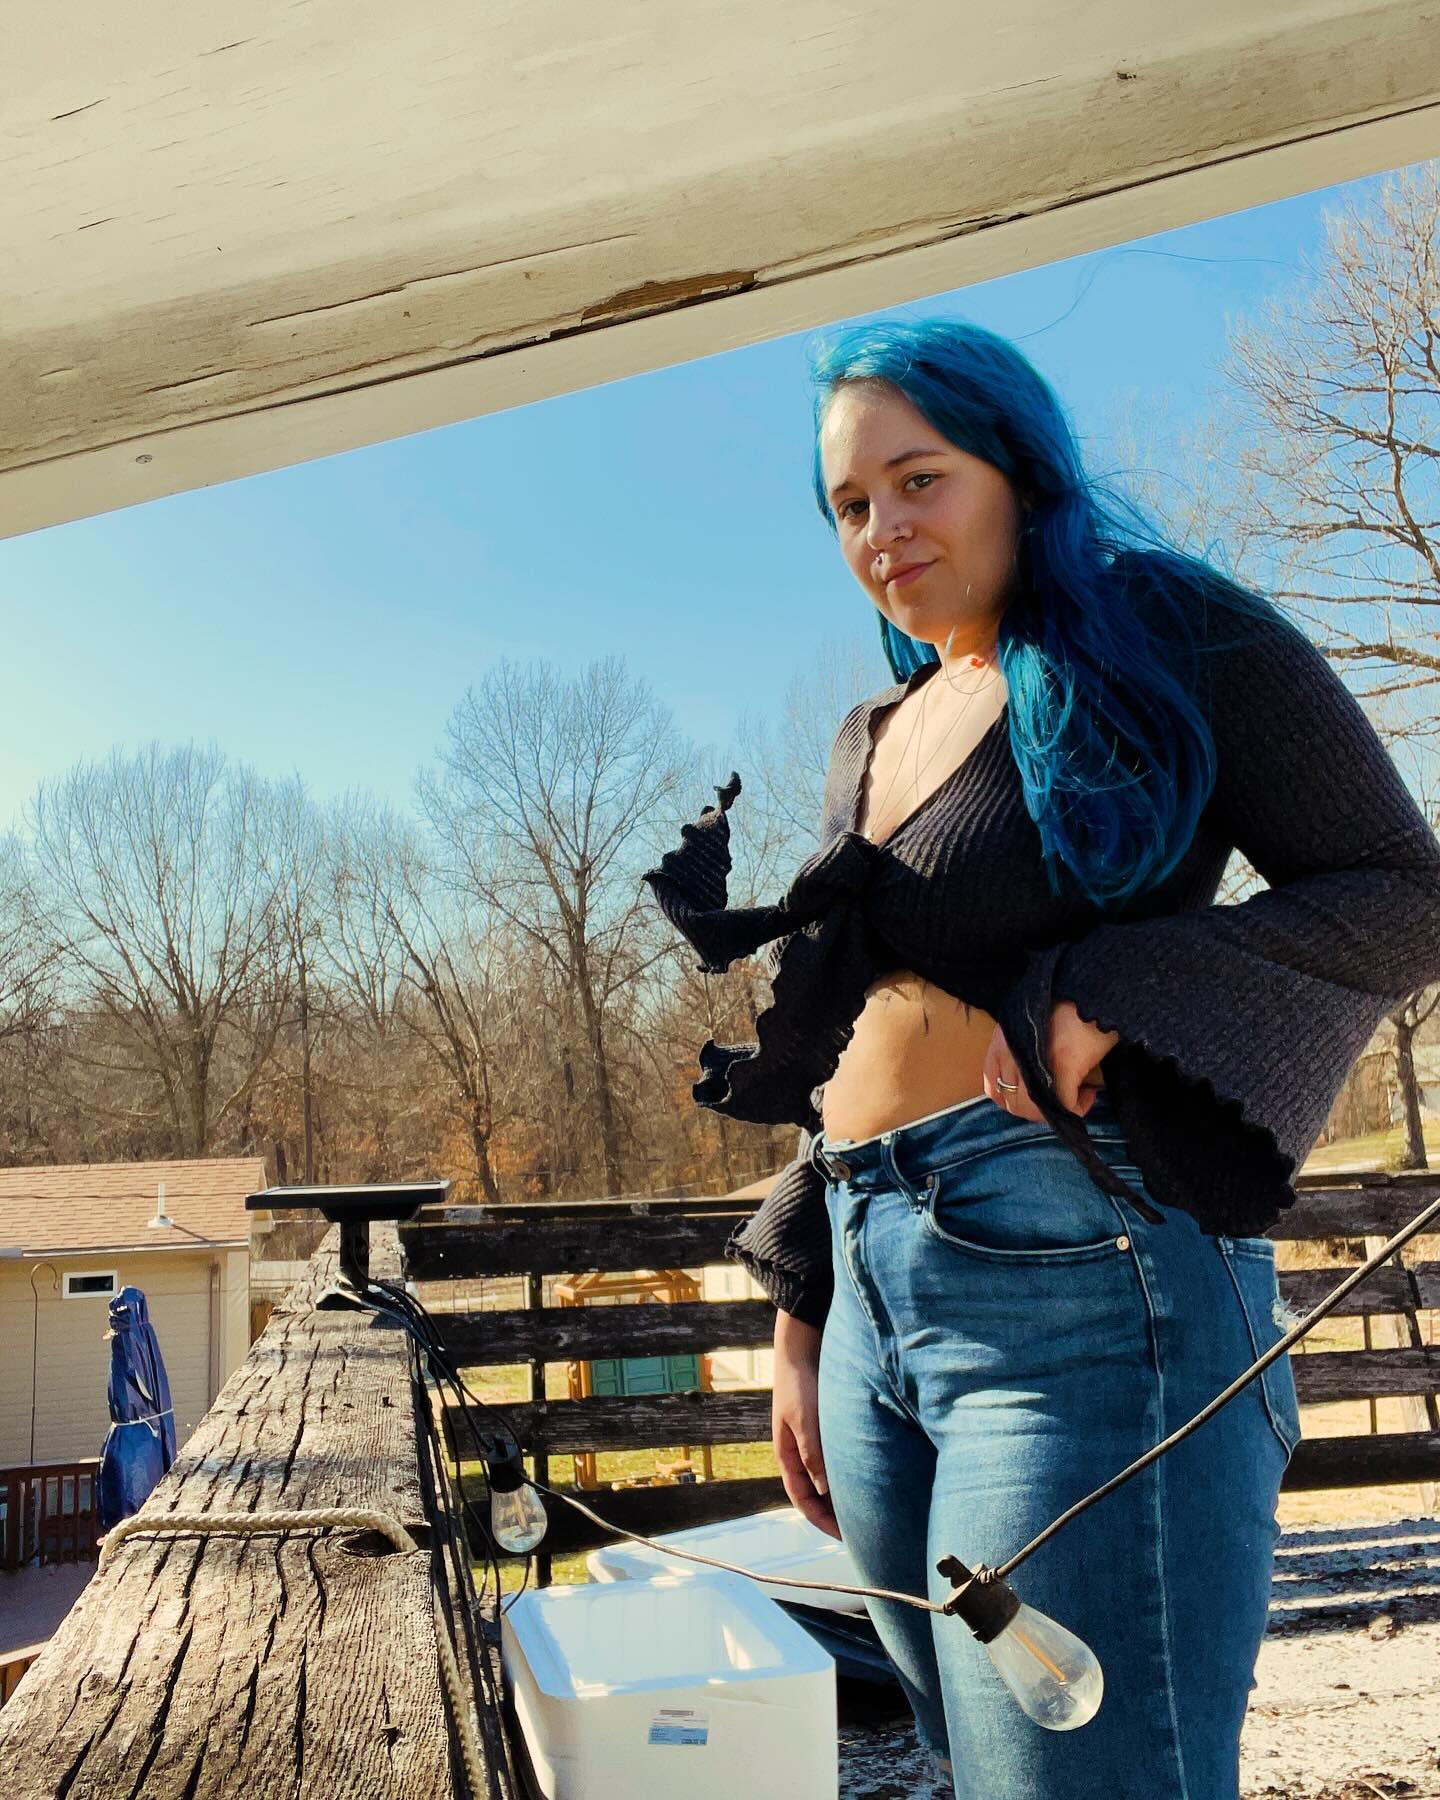 Was trying to take a cute picture of my outfit, but it was so windy
#tattoomodel #tattedgirl #inkedgirls #bluehairedgirl